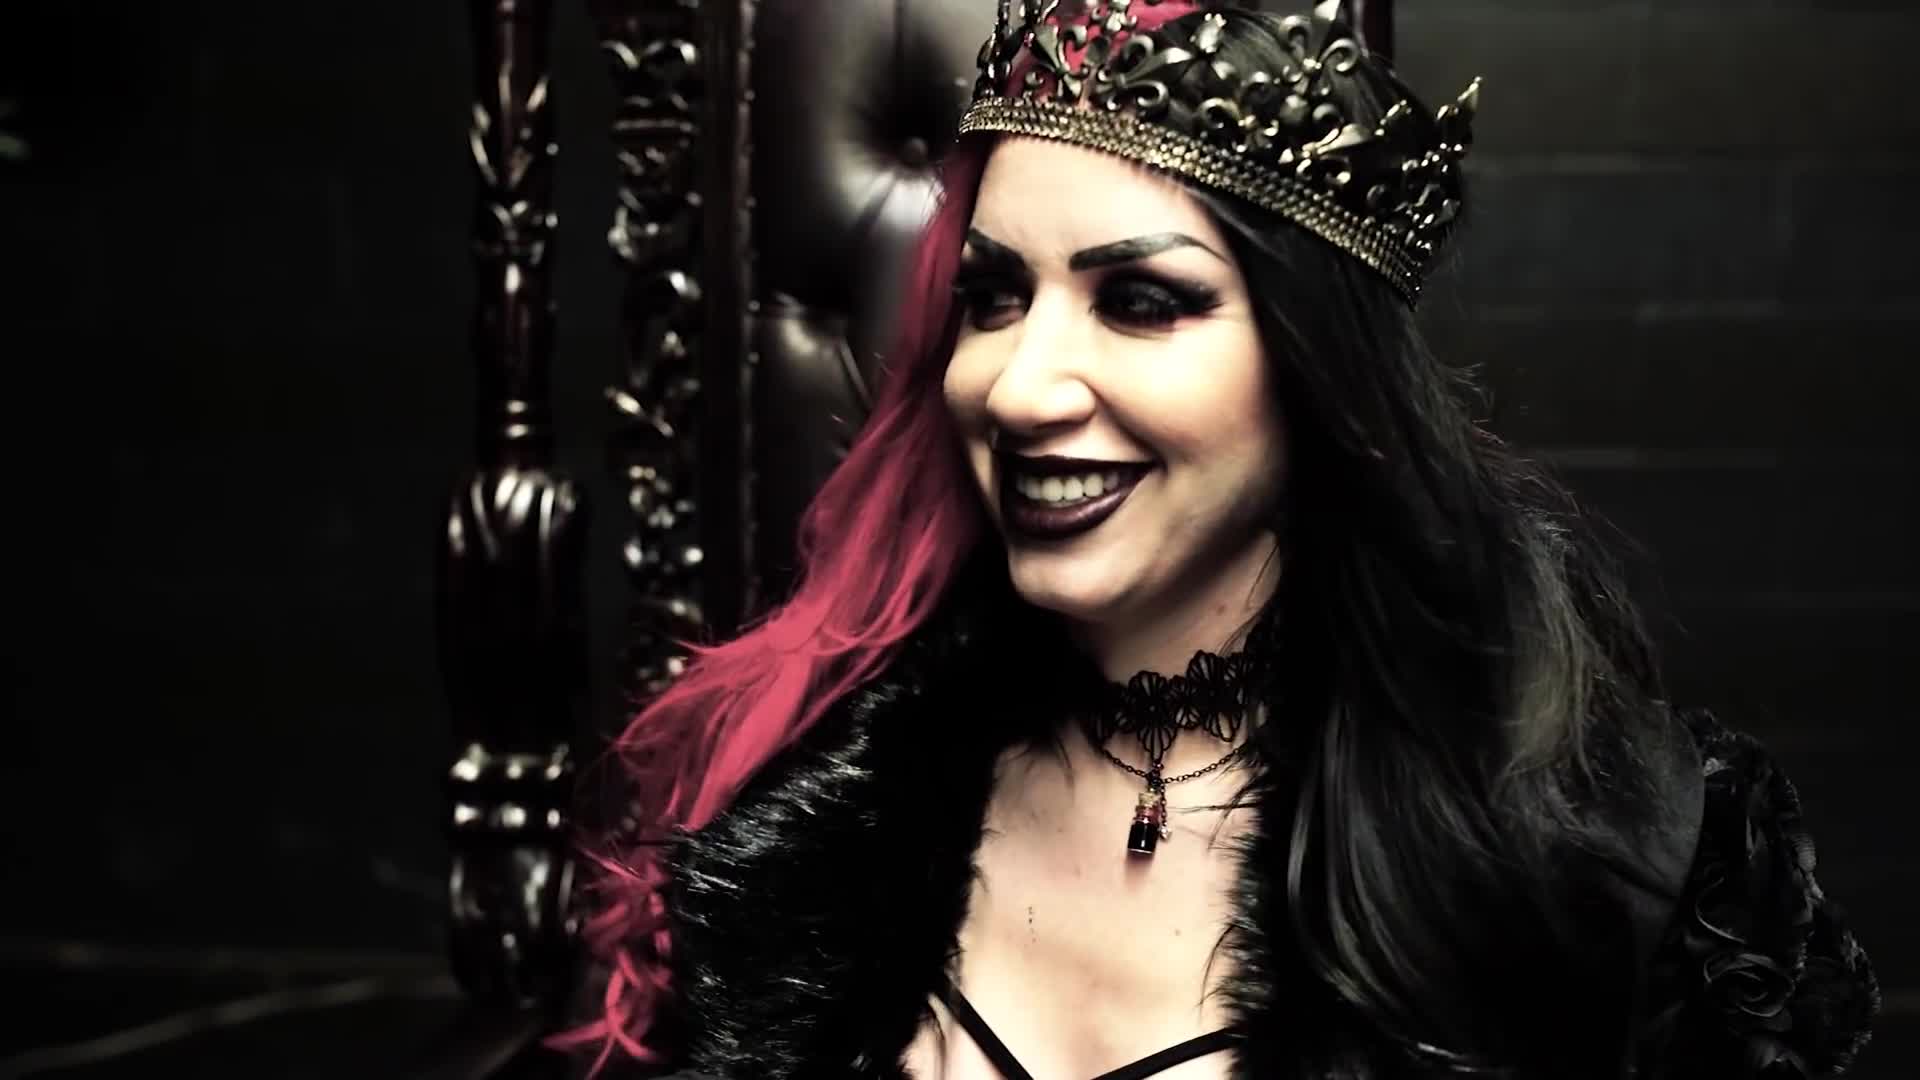 Ash Costello Gifs Search. Search & Share on Homdor